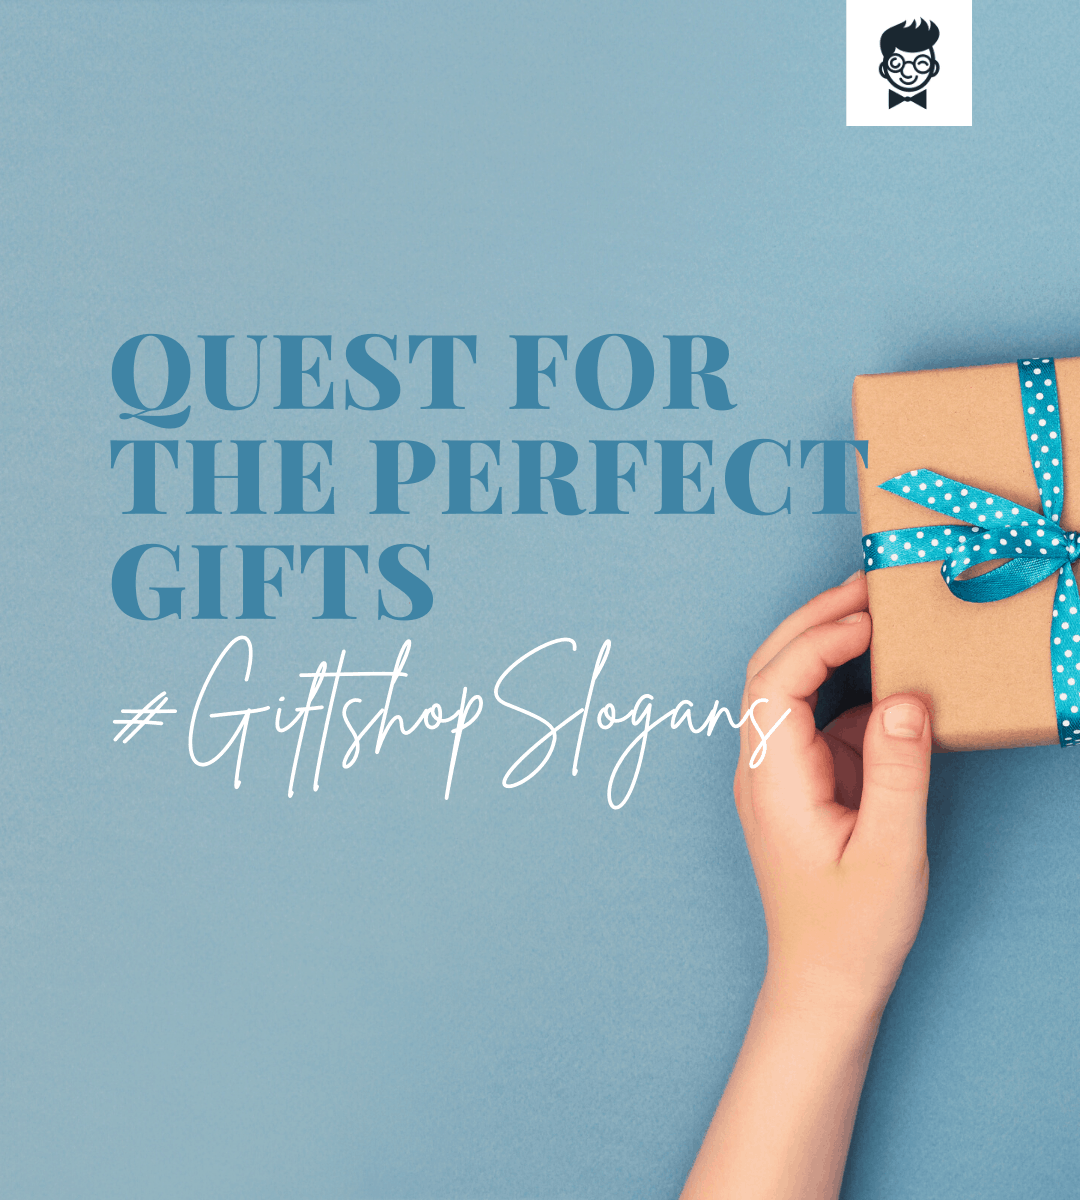 Gift Shop Slogans And Taglines Generator Guide